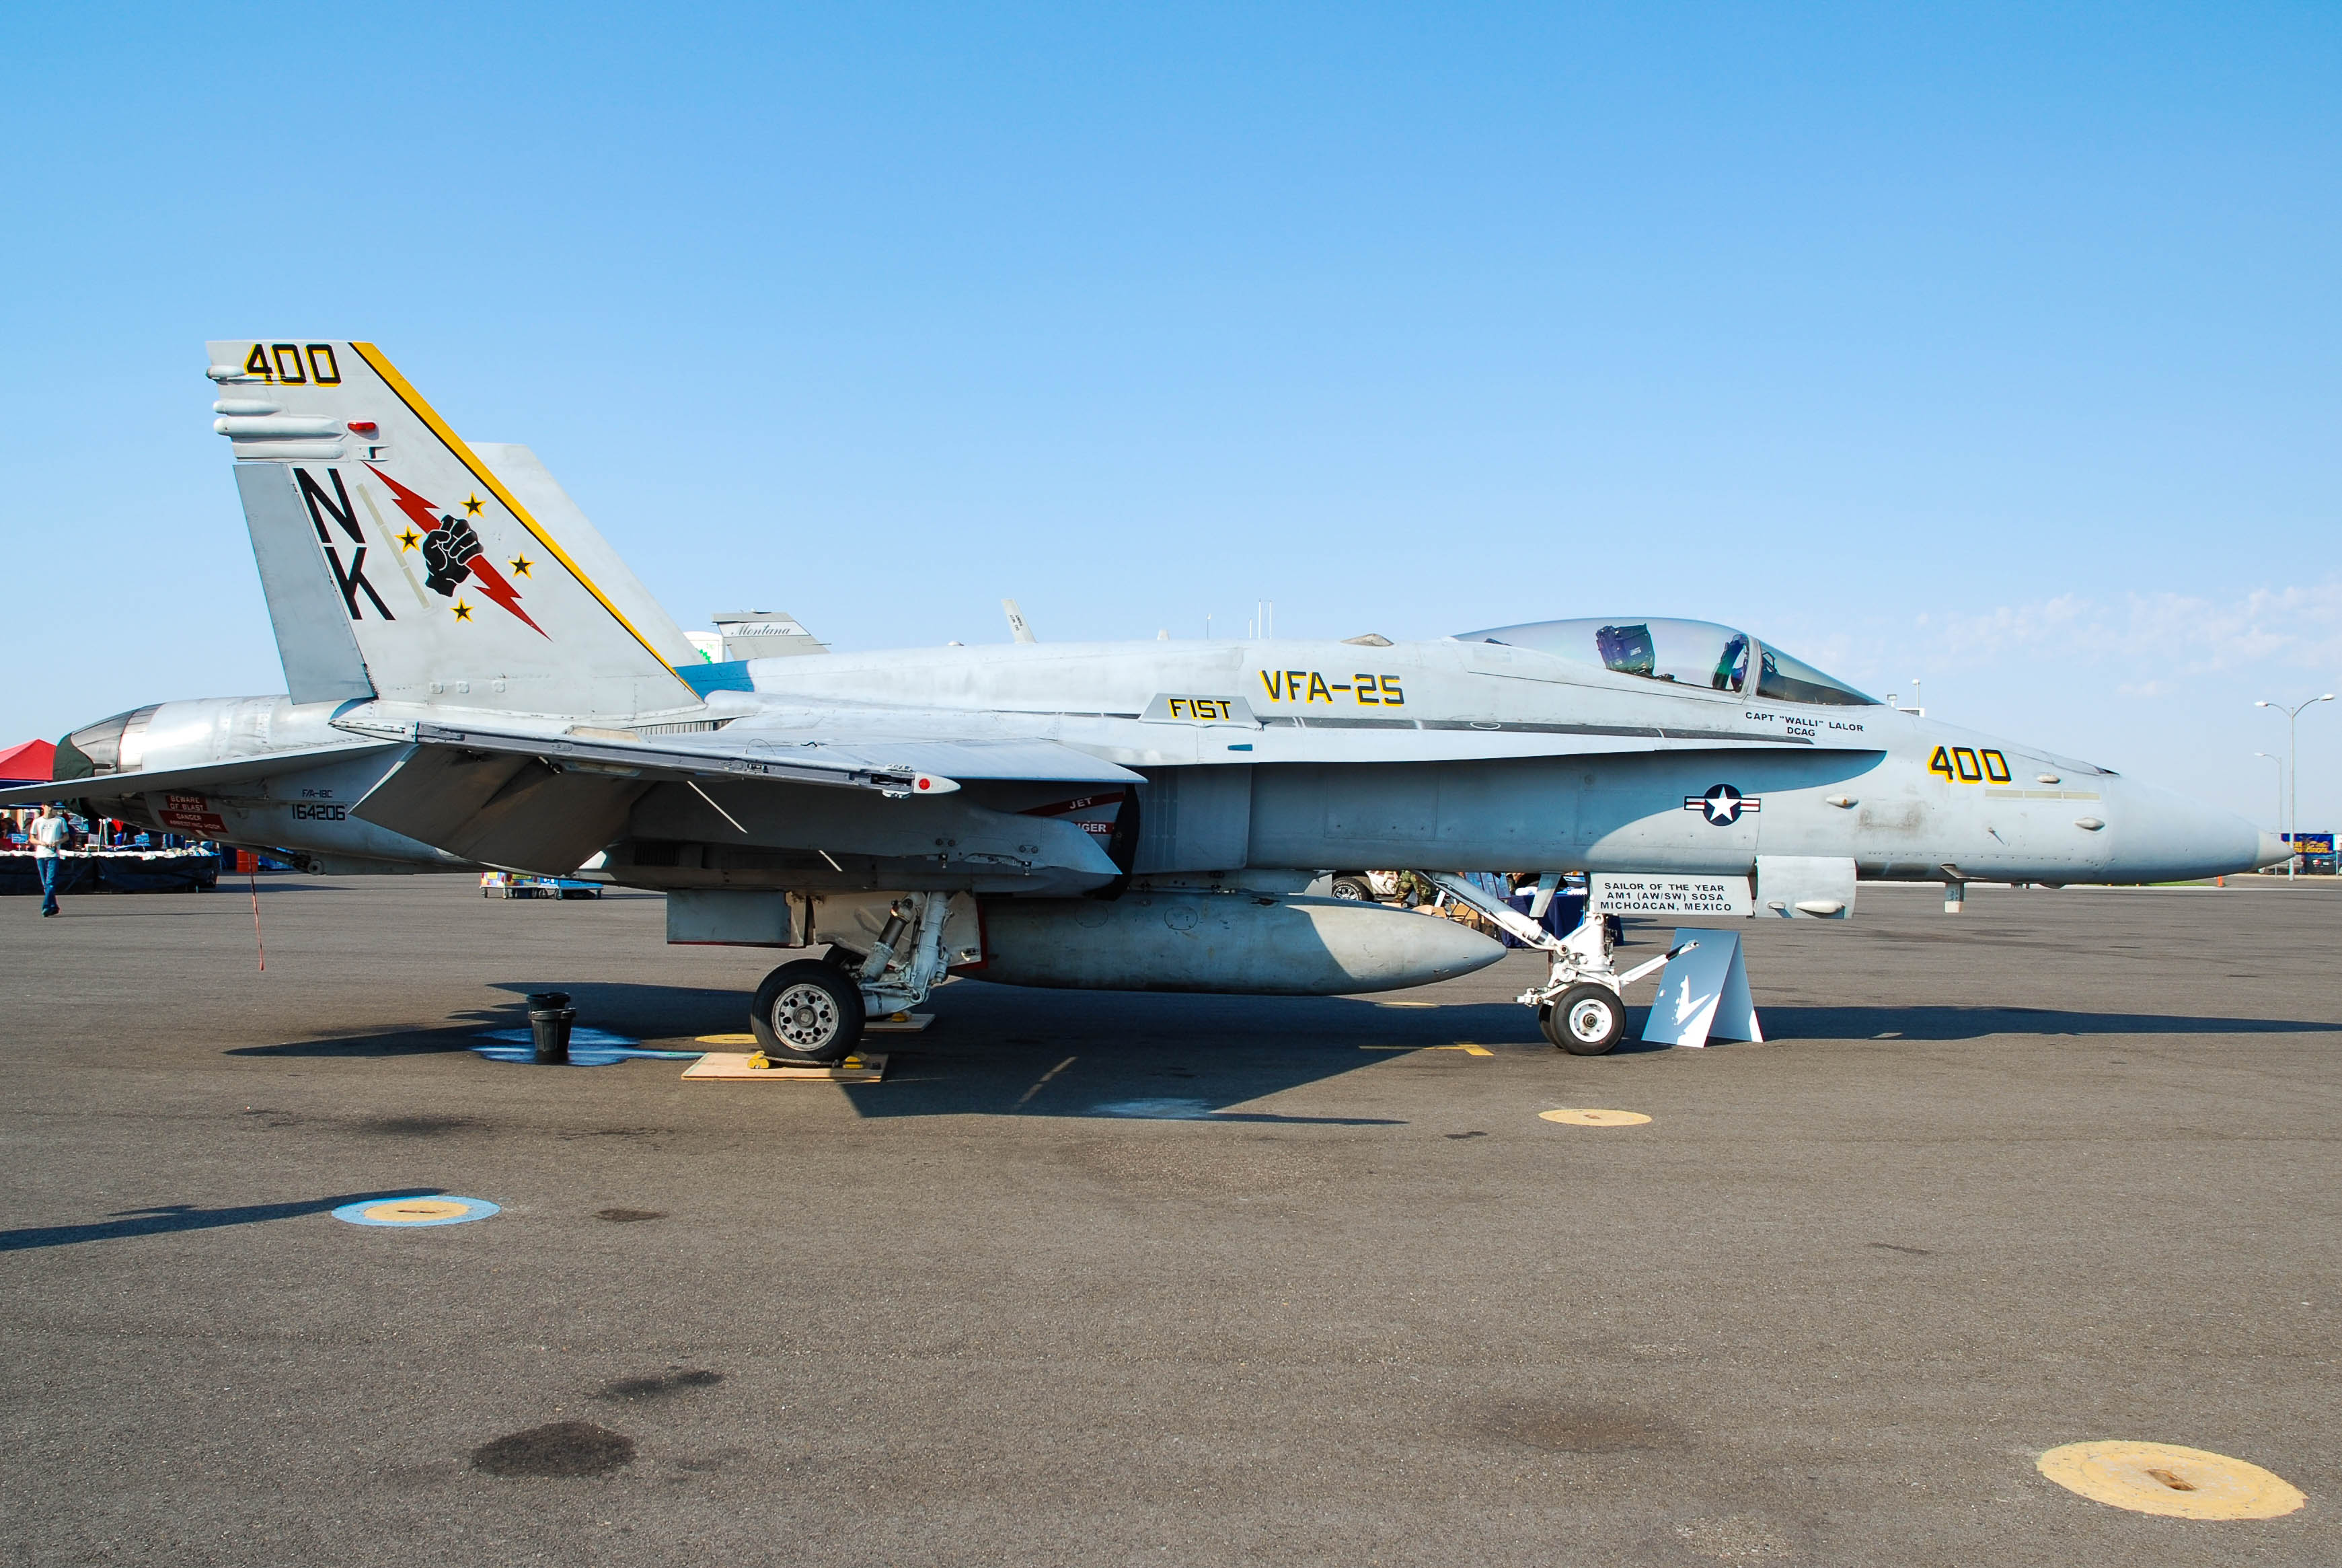 164206/164206 USN - United States Navy McDonnell-Douglas F/A-18C Hornet Photo by colinw - AVSpotters.com